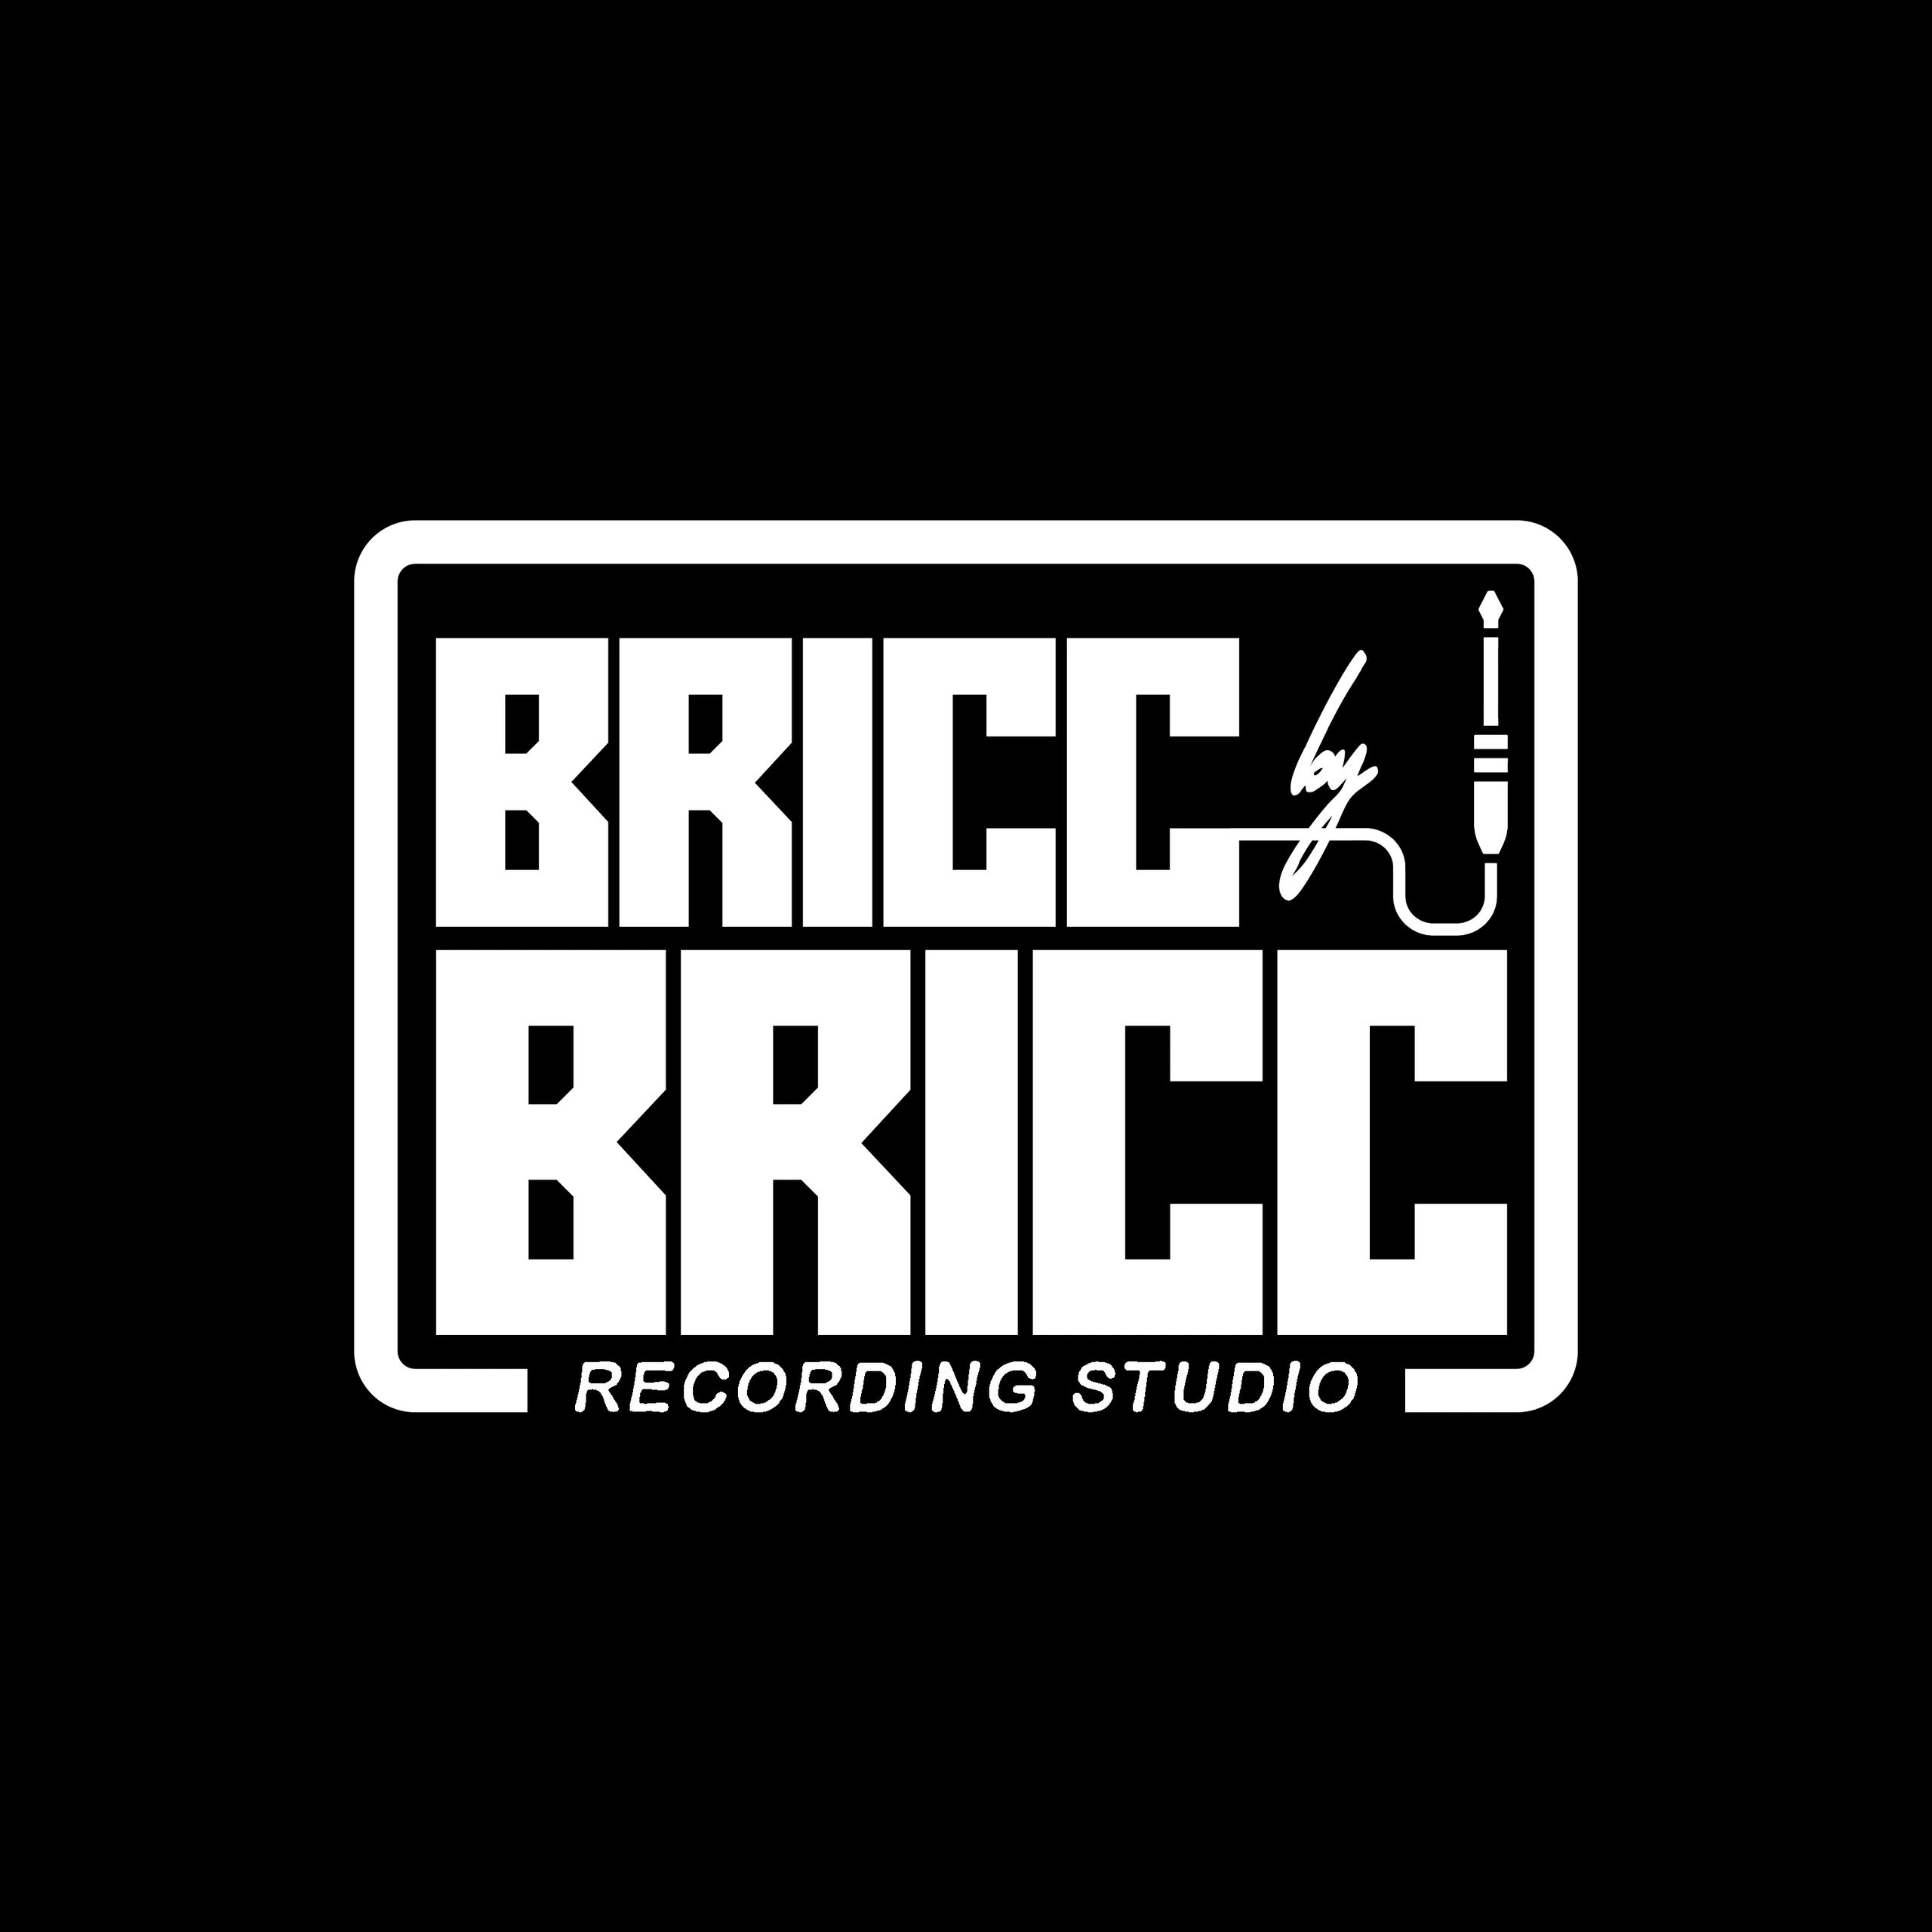 Based in Houston, TX / Owner | @dierichsupreme 
Music/Media Powerhouse for Your Recording, Mixing, M